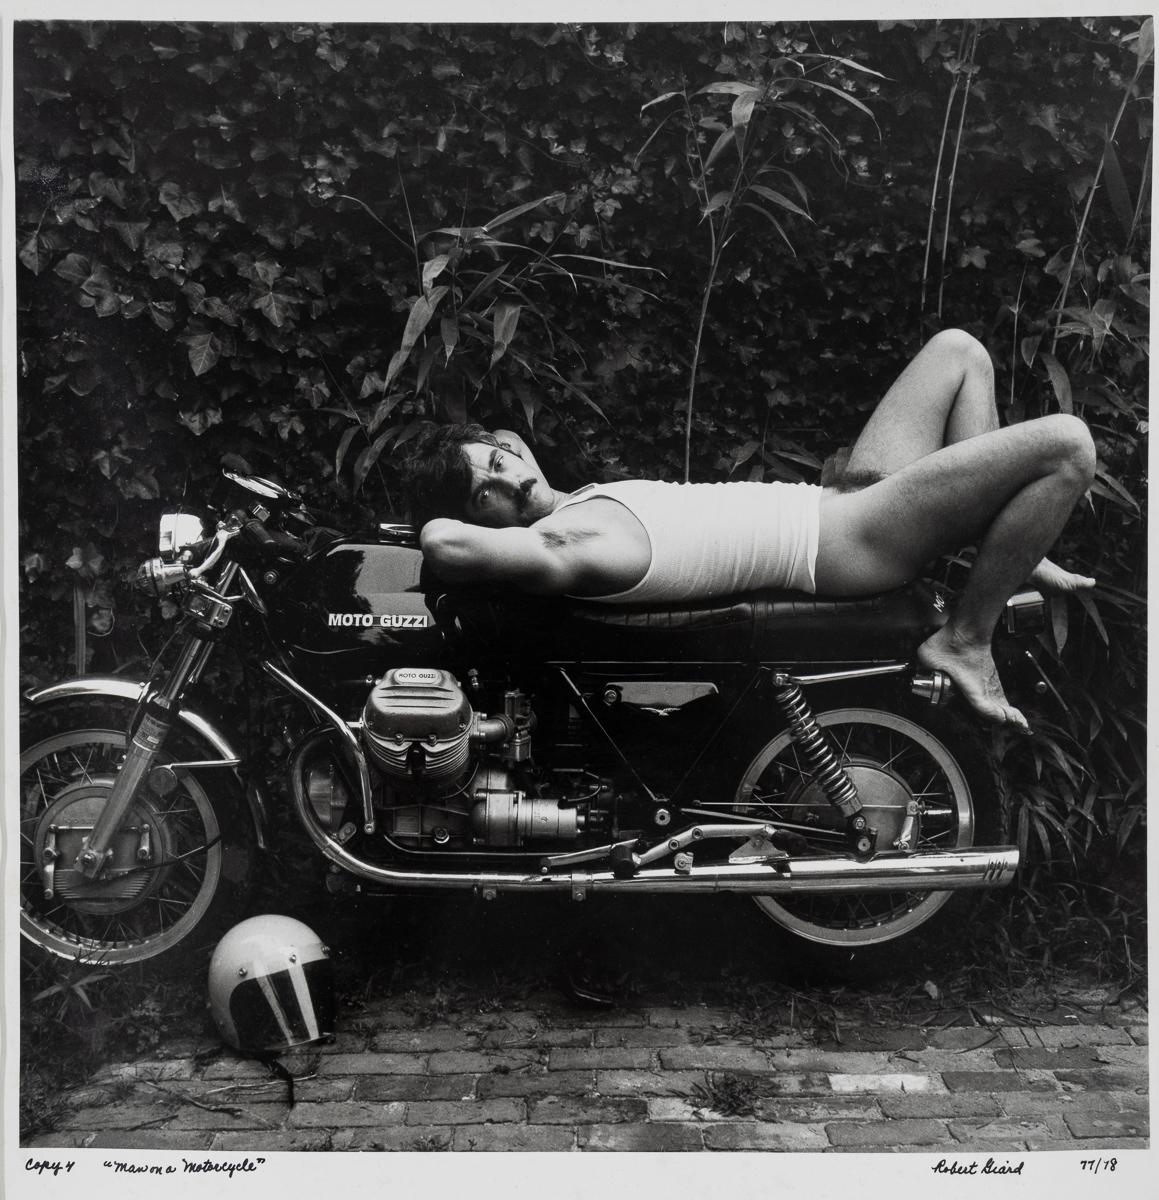 Man on Motorcycle - Photograph by Robert Giard